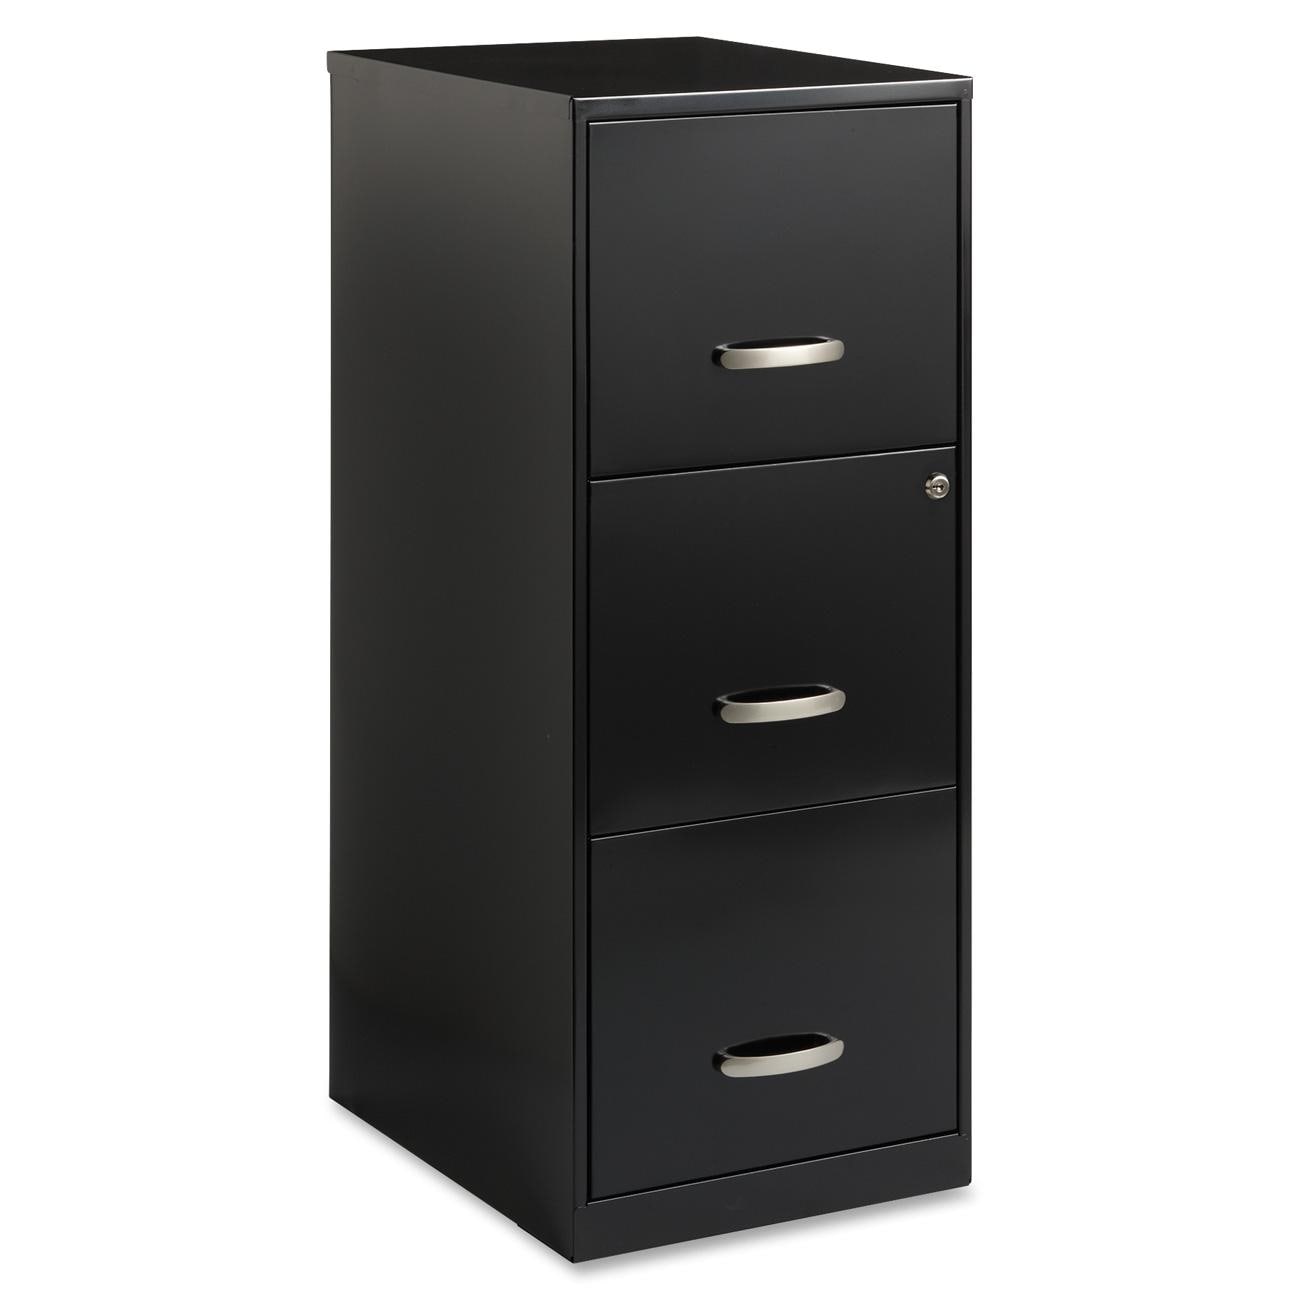 2 Drawer Black Lateral Filing Cabinet Metal Steel Black File Cabinets for Home Office Lateral File Cabinet with Lock INTERGREAT 